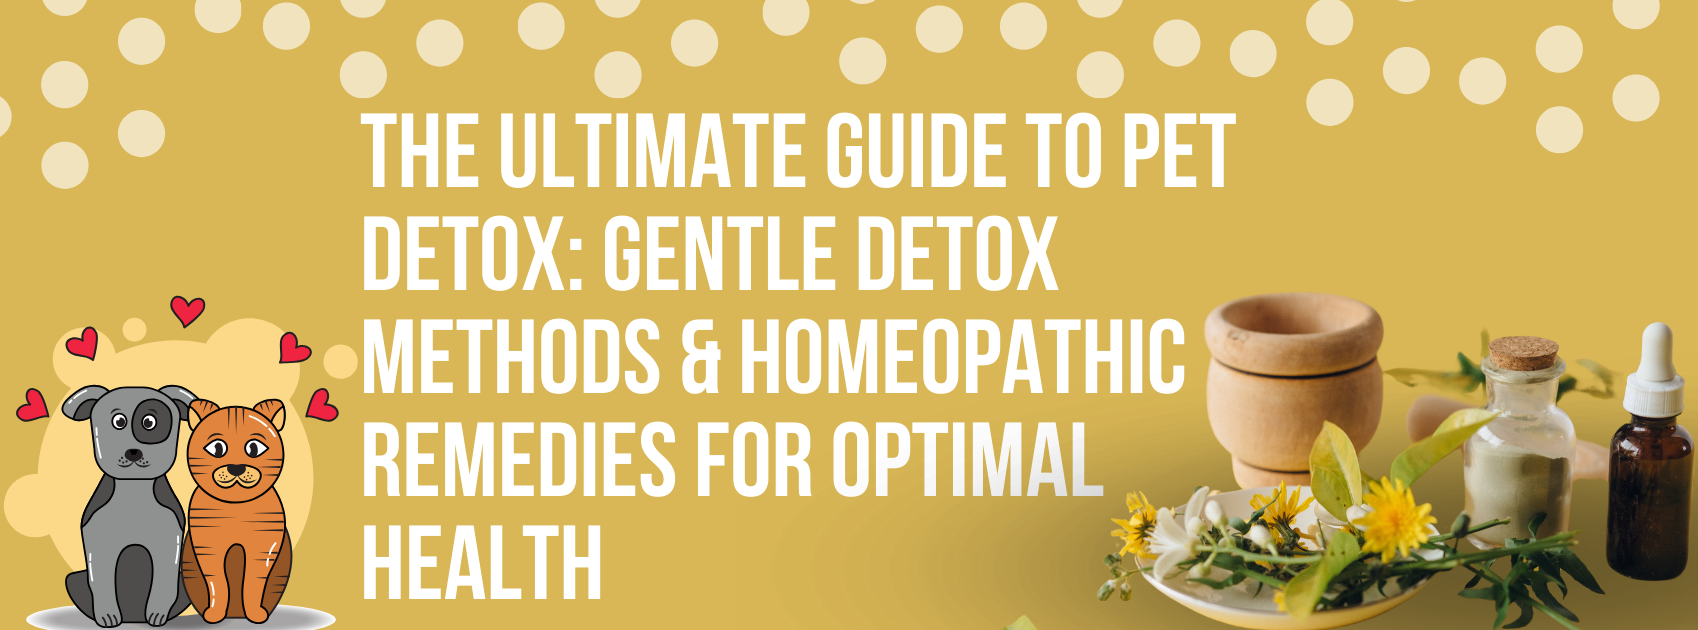 The Ultimate Guide to Pet Detox: Gentle Detox Methods & Homeopathic Remedies for Optimal Health